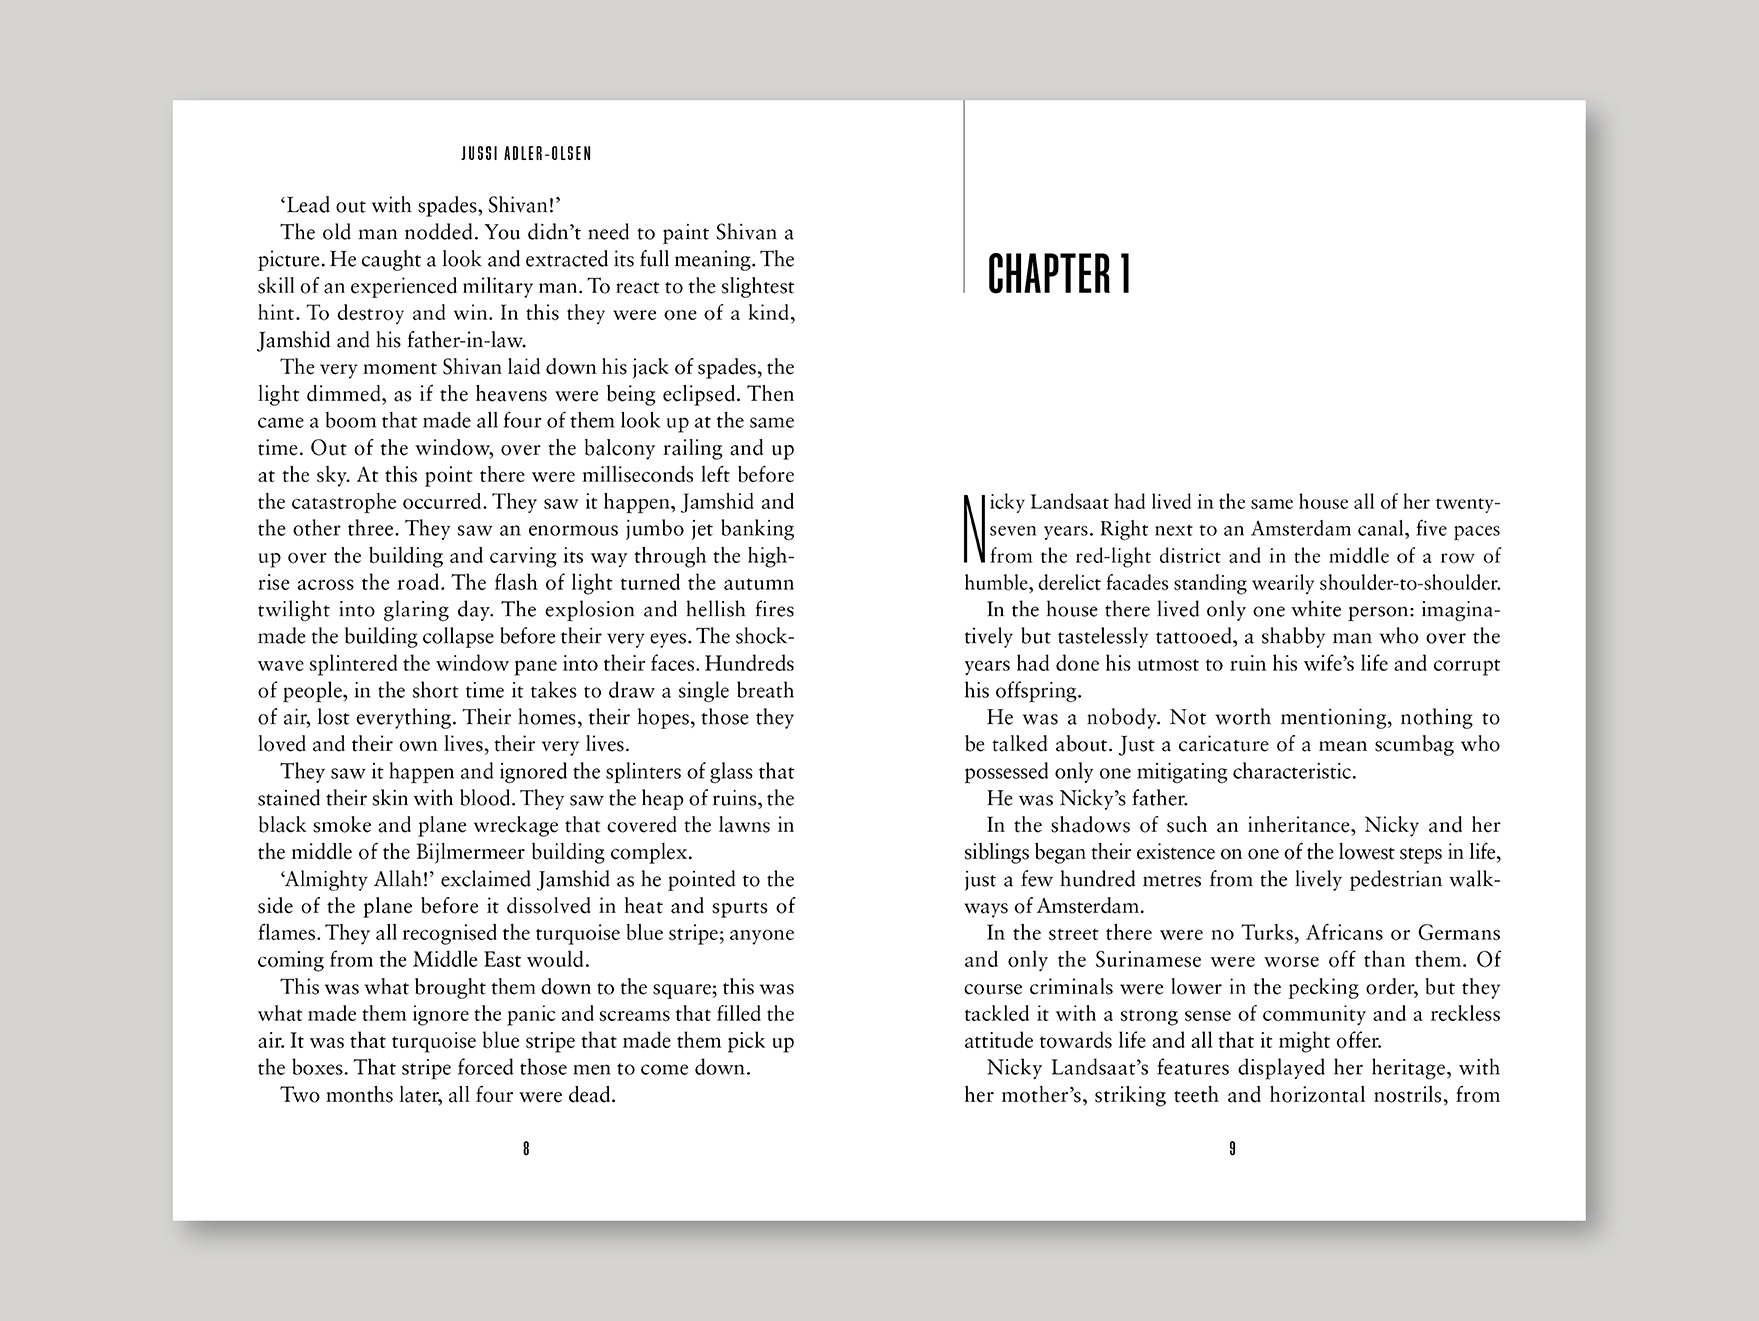 Inside typeset pages from a fiction book